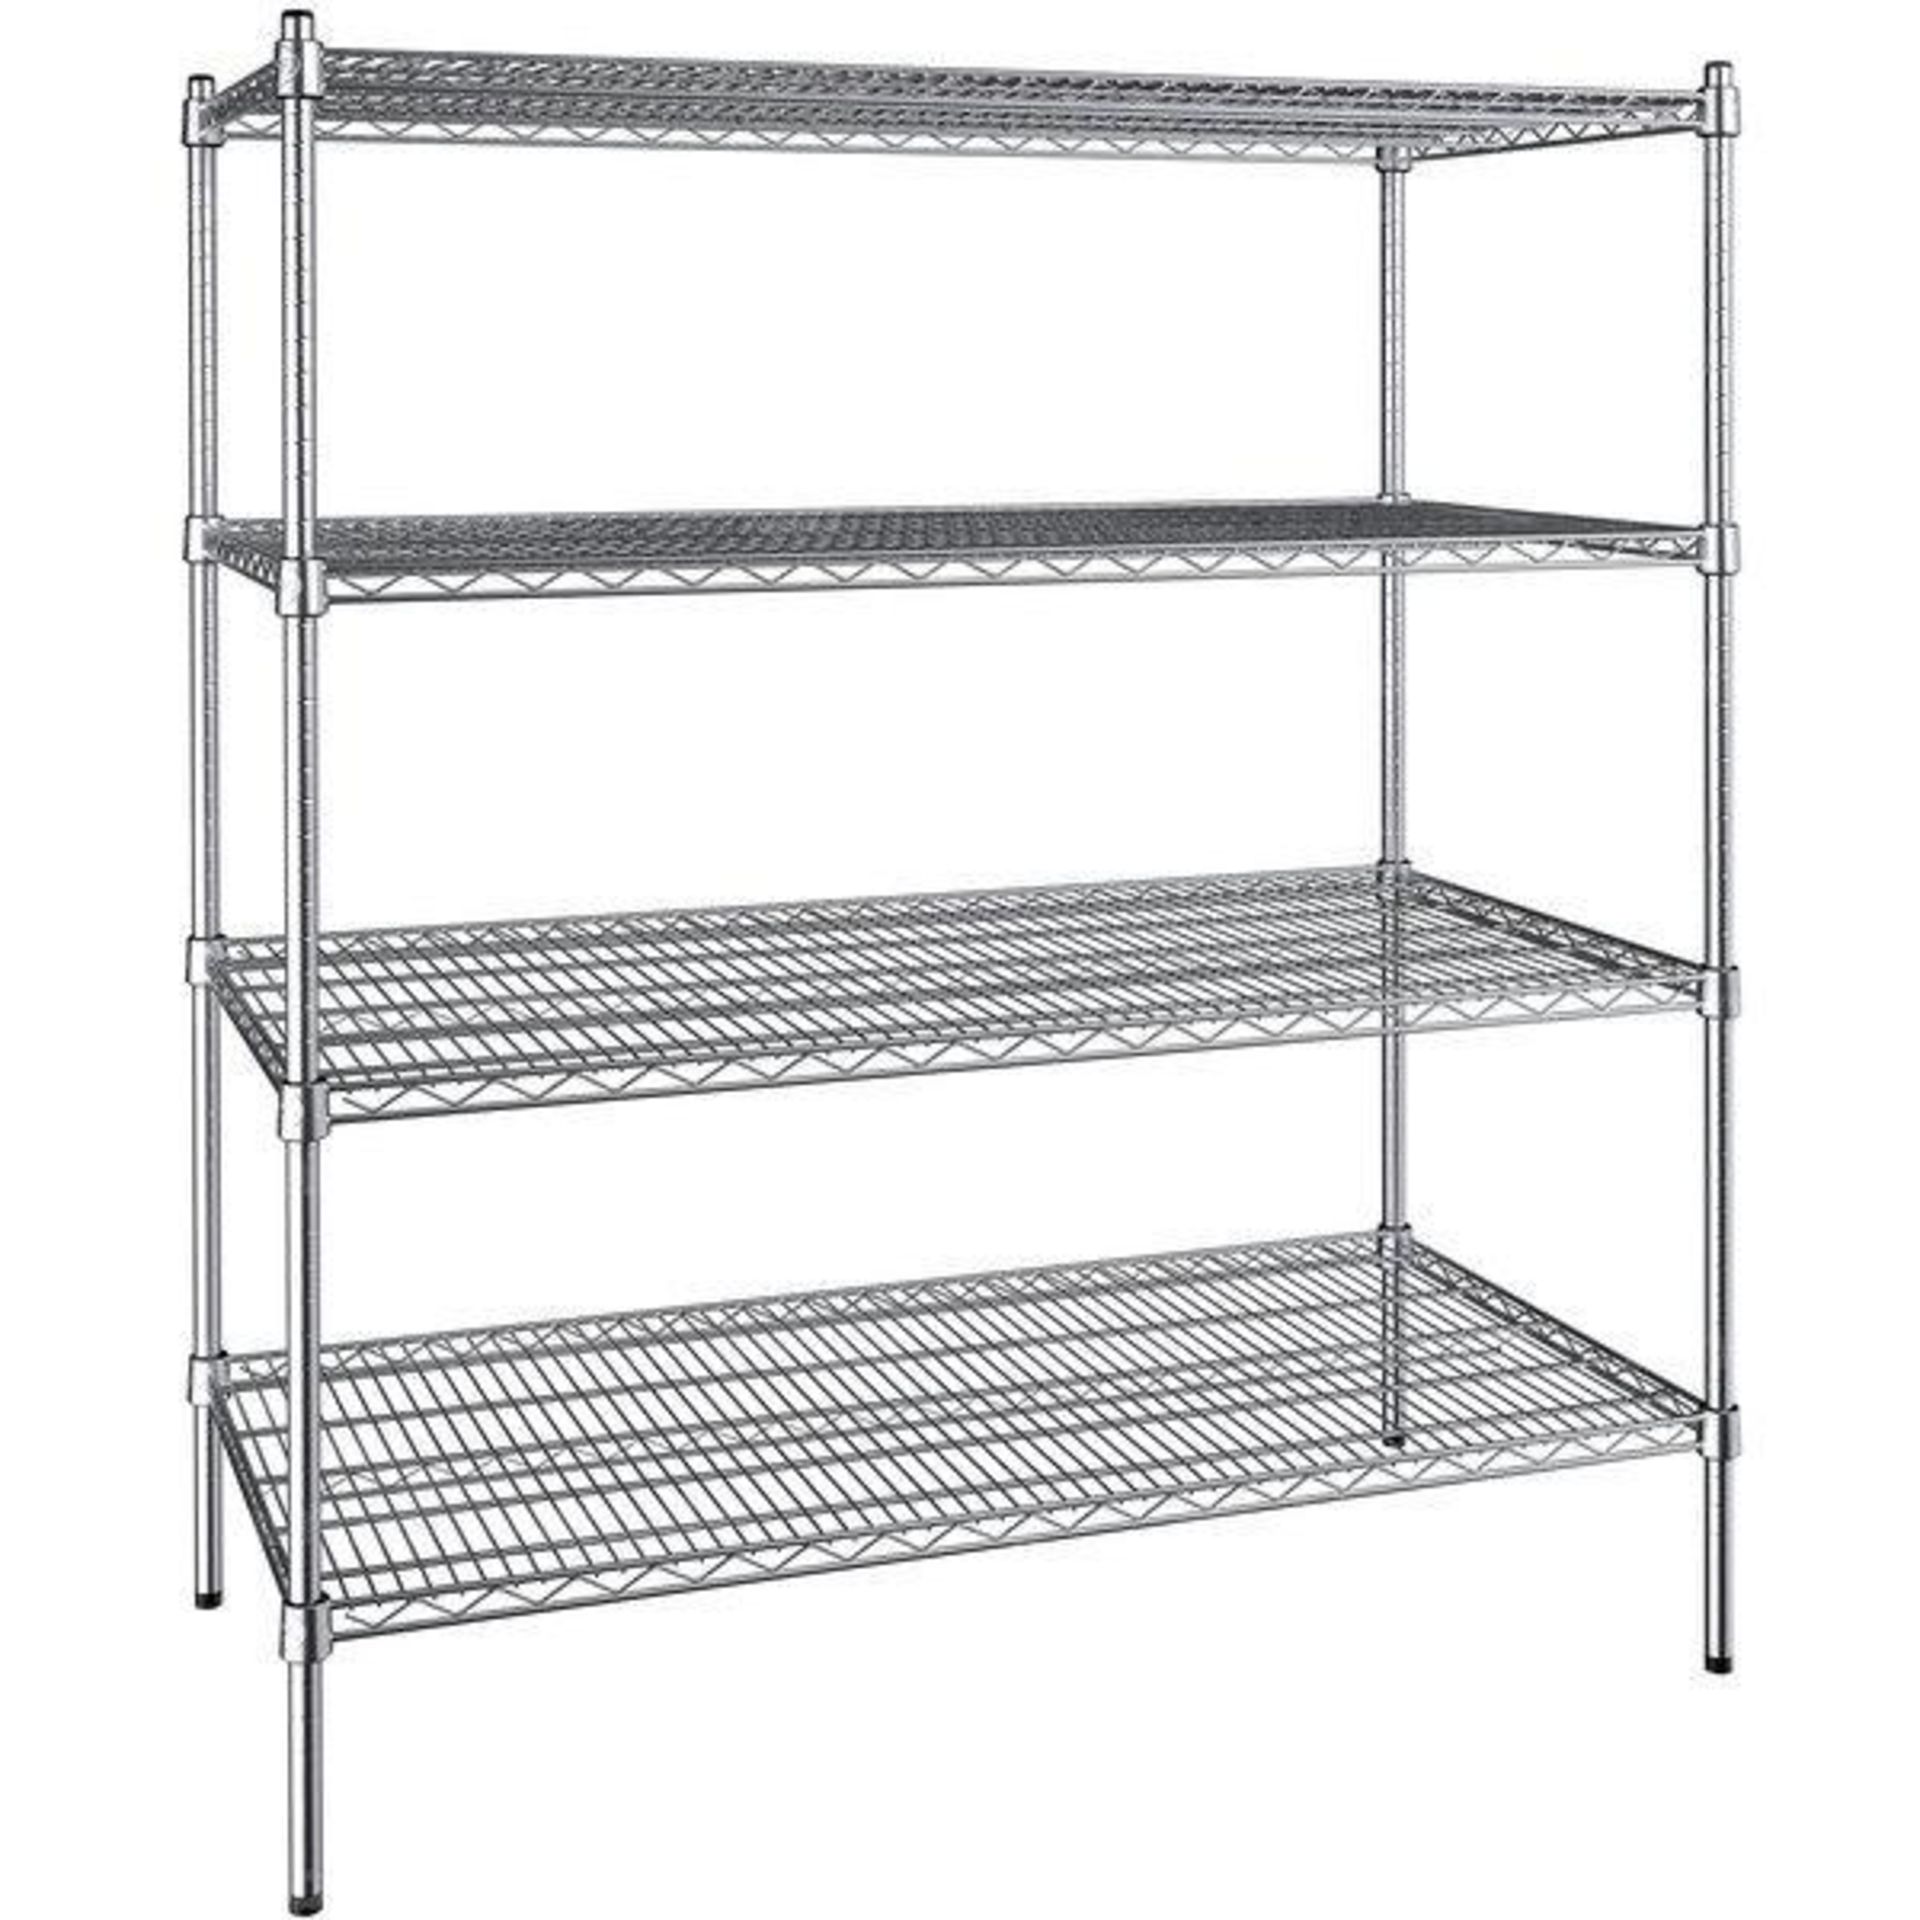 DESCRIPTION: 48" X 24" FOUR TIER WIRE SHELF. ADDITIONAL INFORMATION CONTENTS ARE NOT INCLUDED SIZE 4